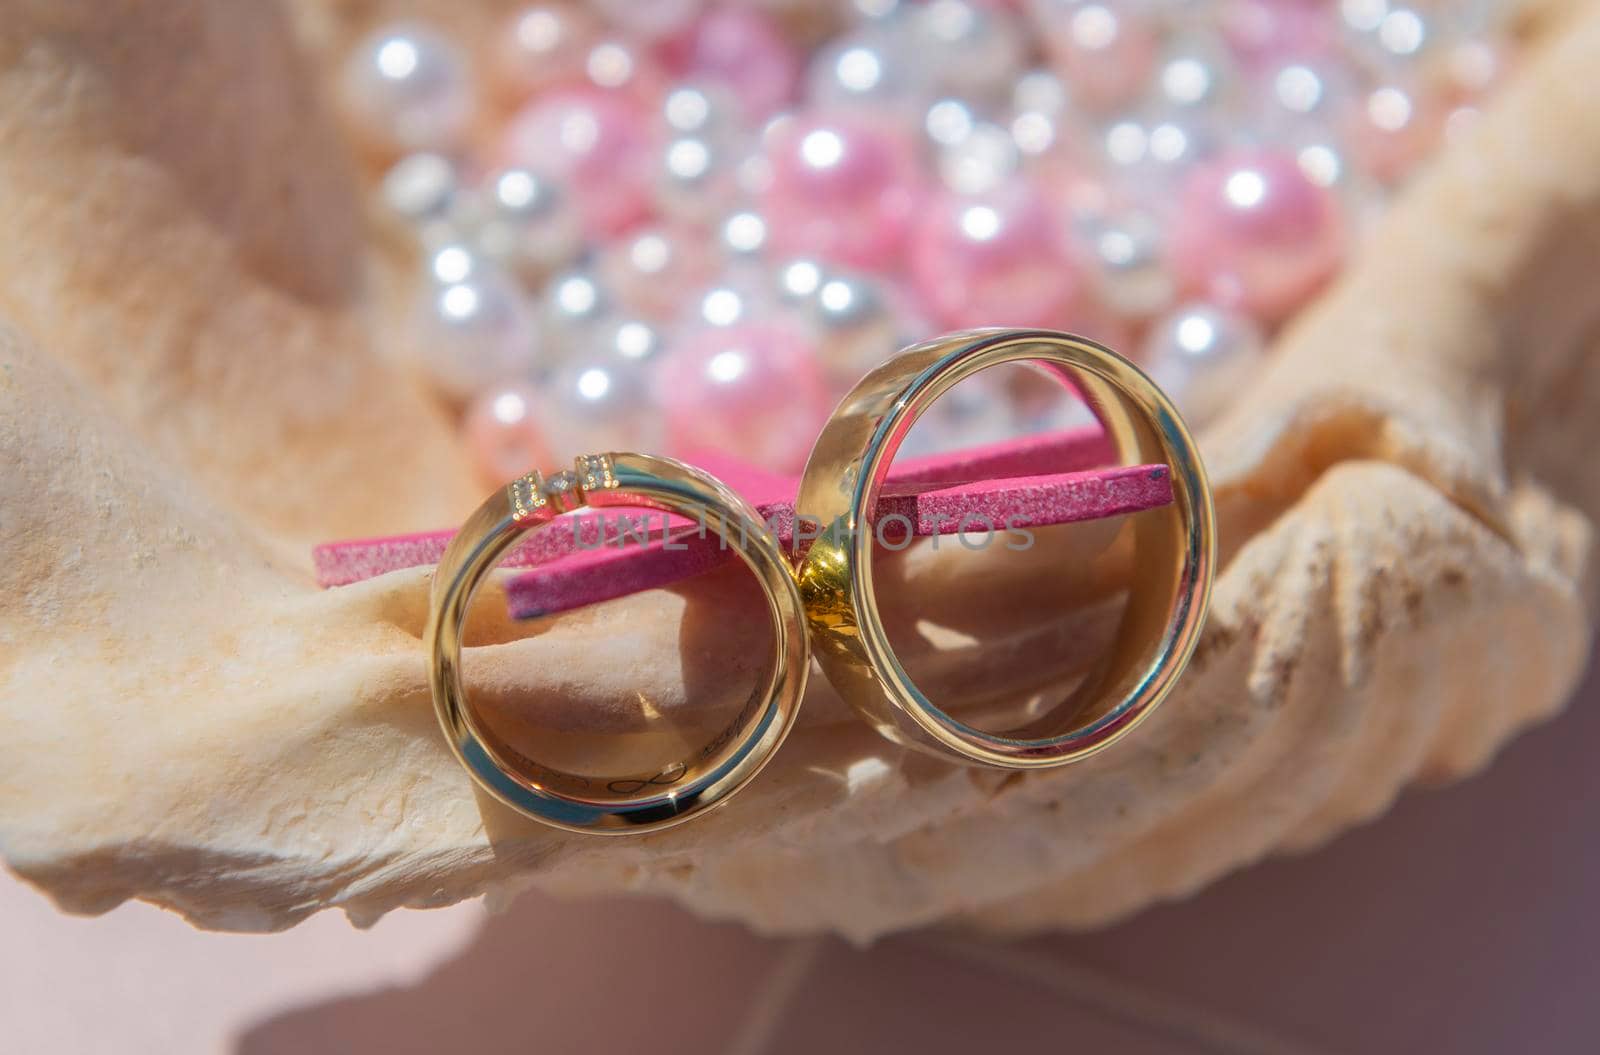 Pair of gold wedding rings on seashell with beads by paulvinten